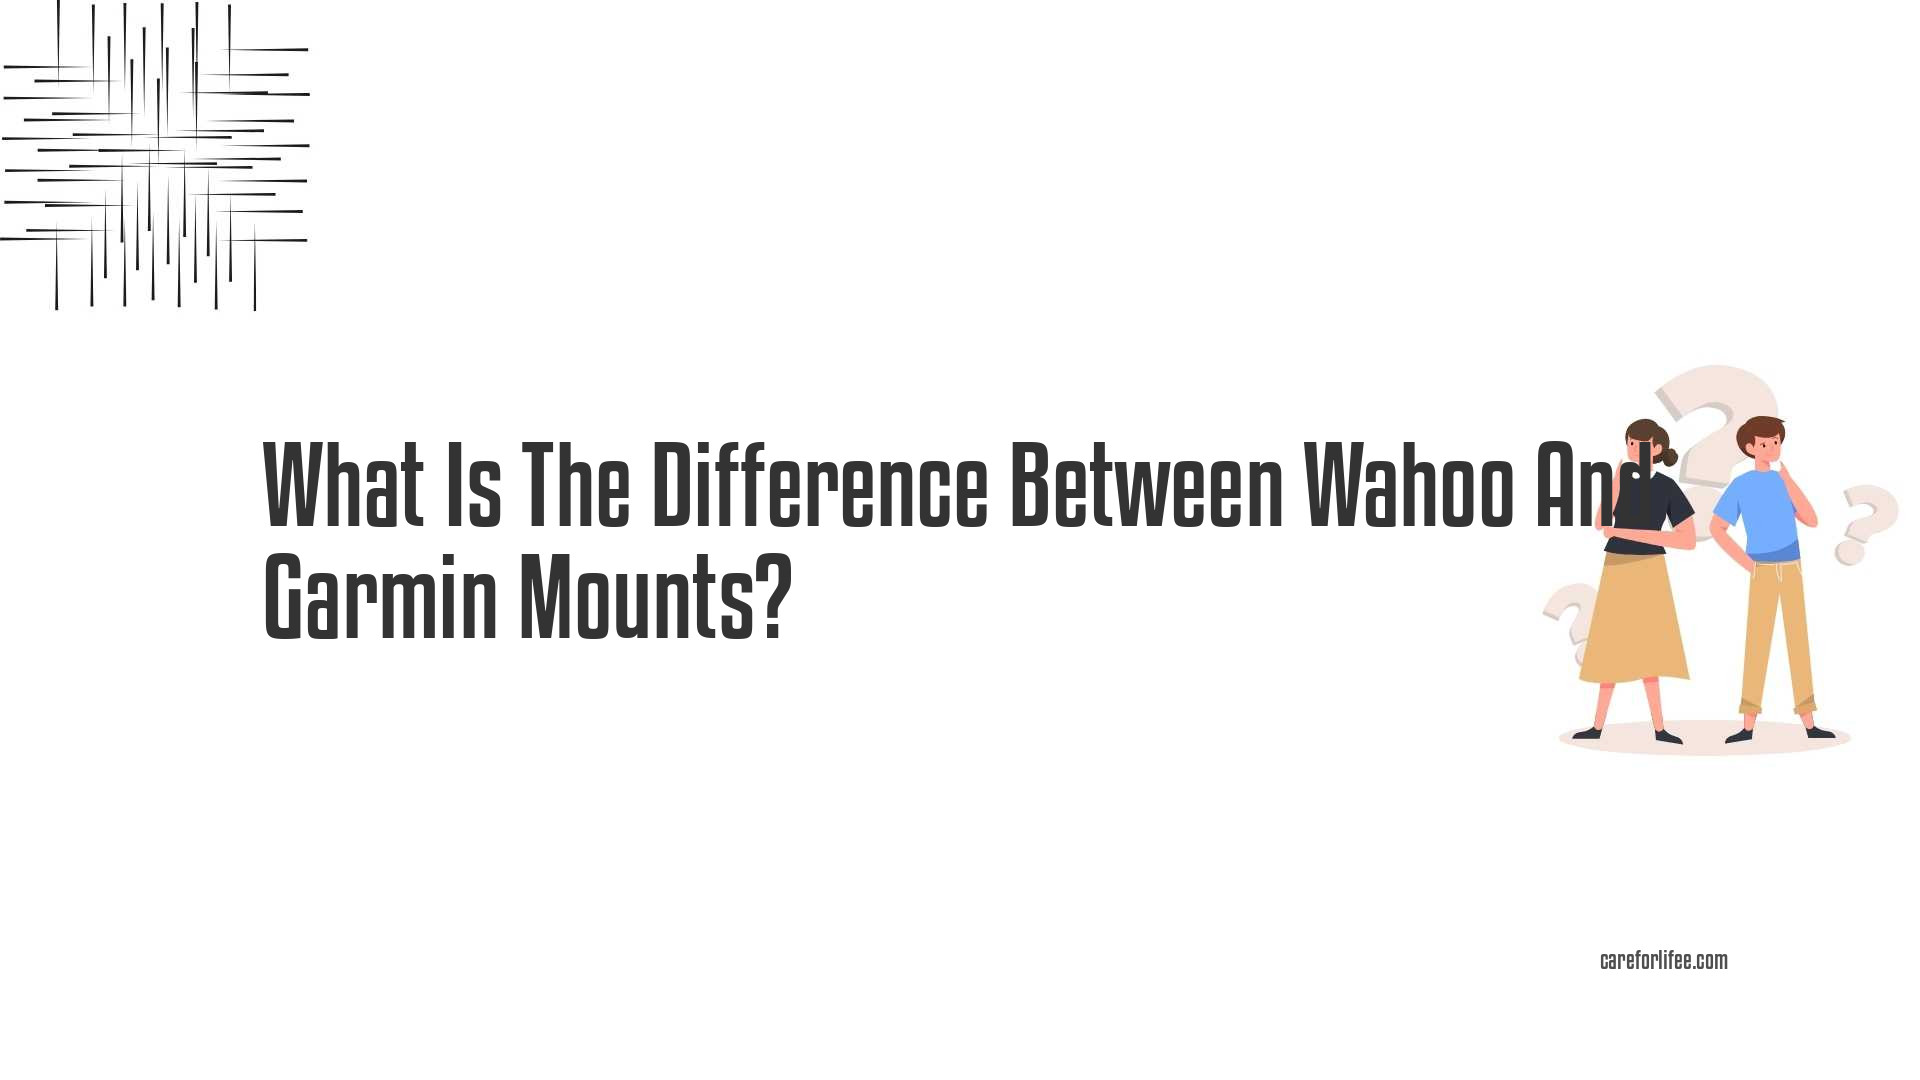 What Is The Difference Between Wahoo And Garmin Mounts?